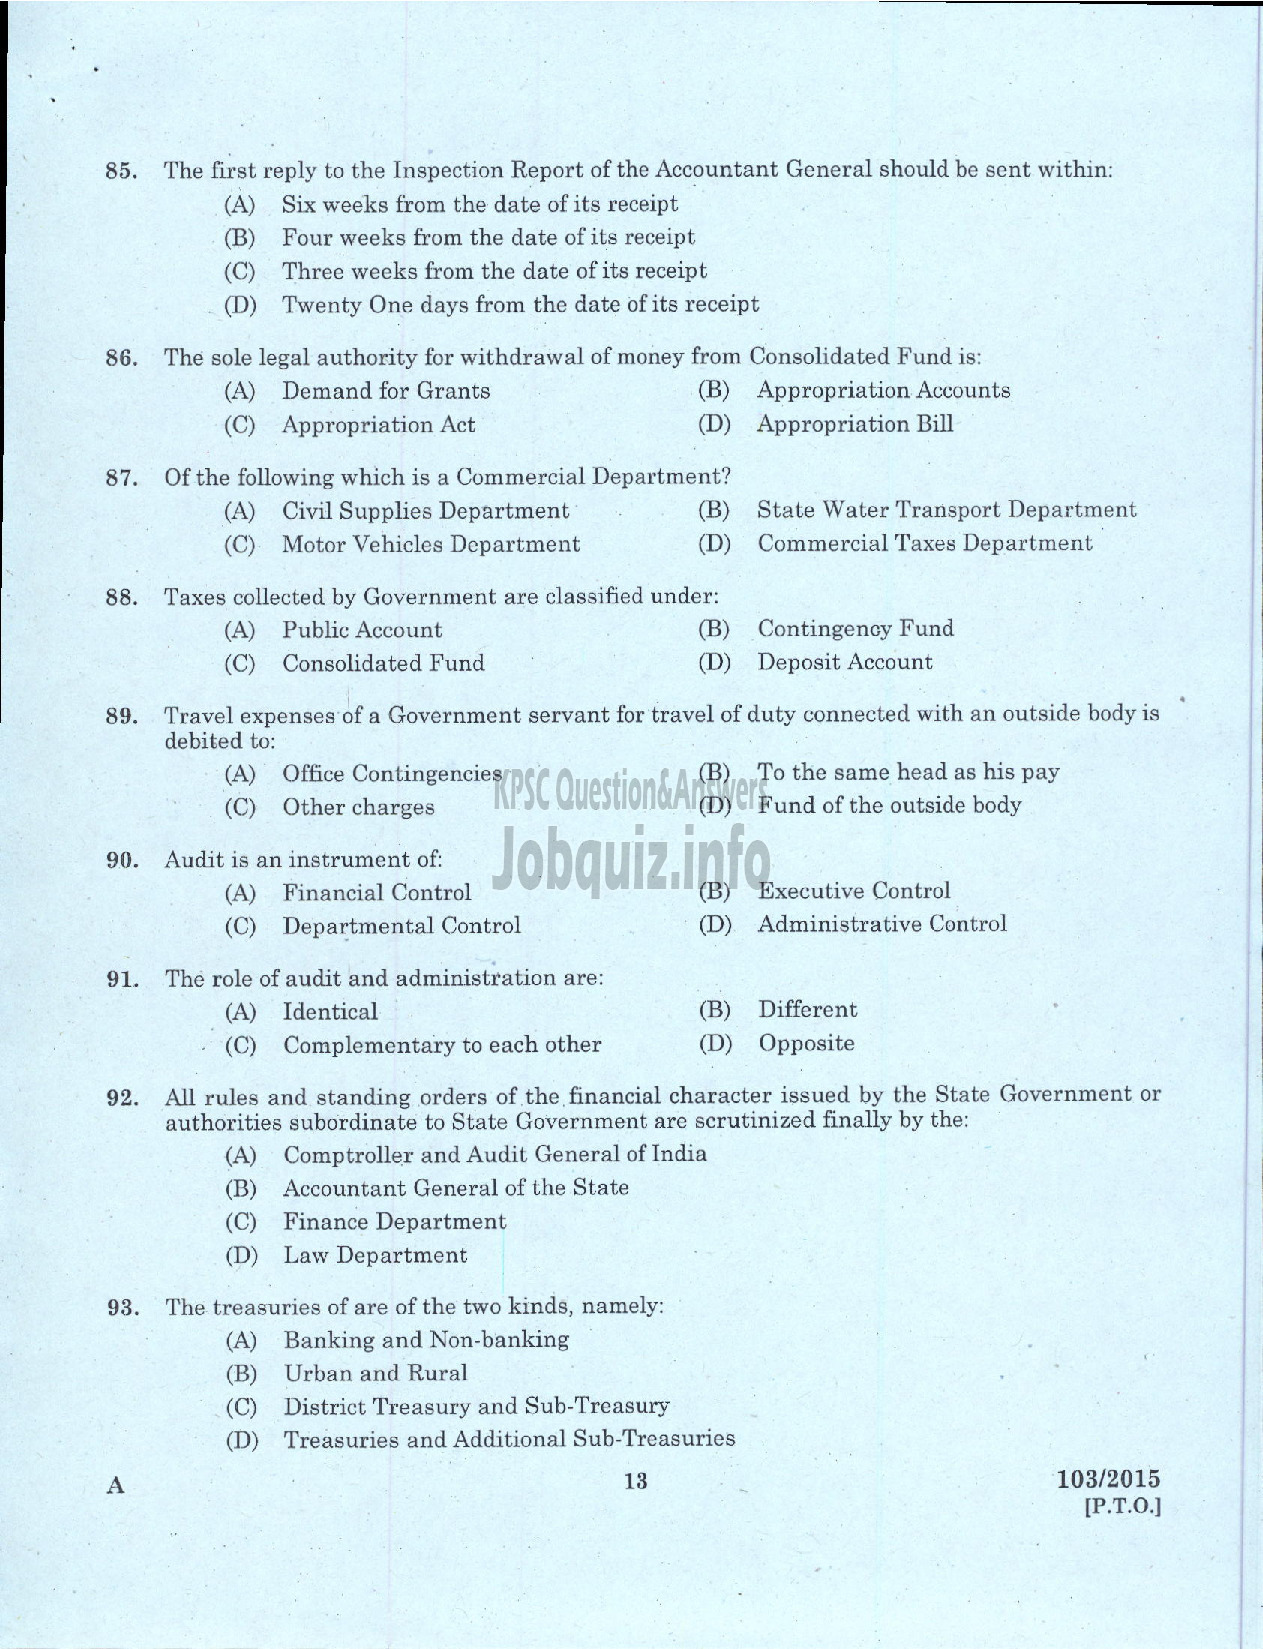 Kerala PSC Question Paper - ADMINISTRATIVE OFFICER BY TRANSFER INTERNAL KSRTC-11